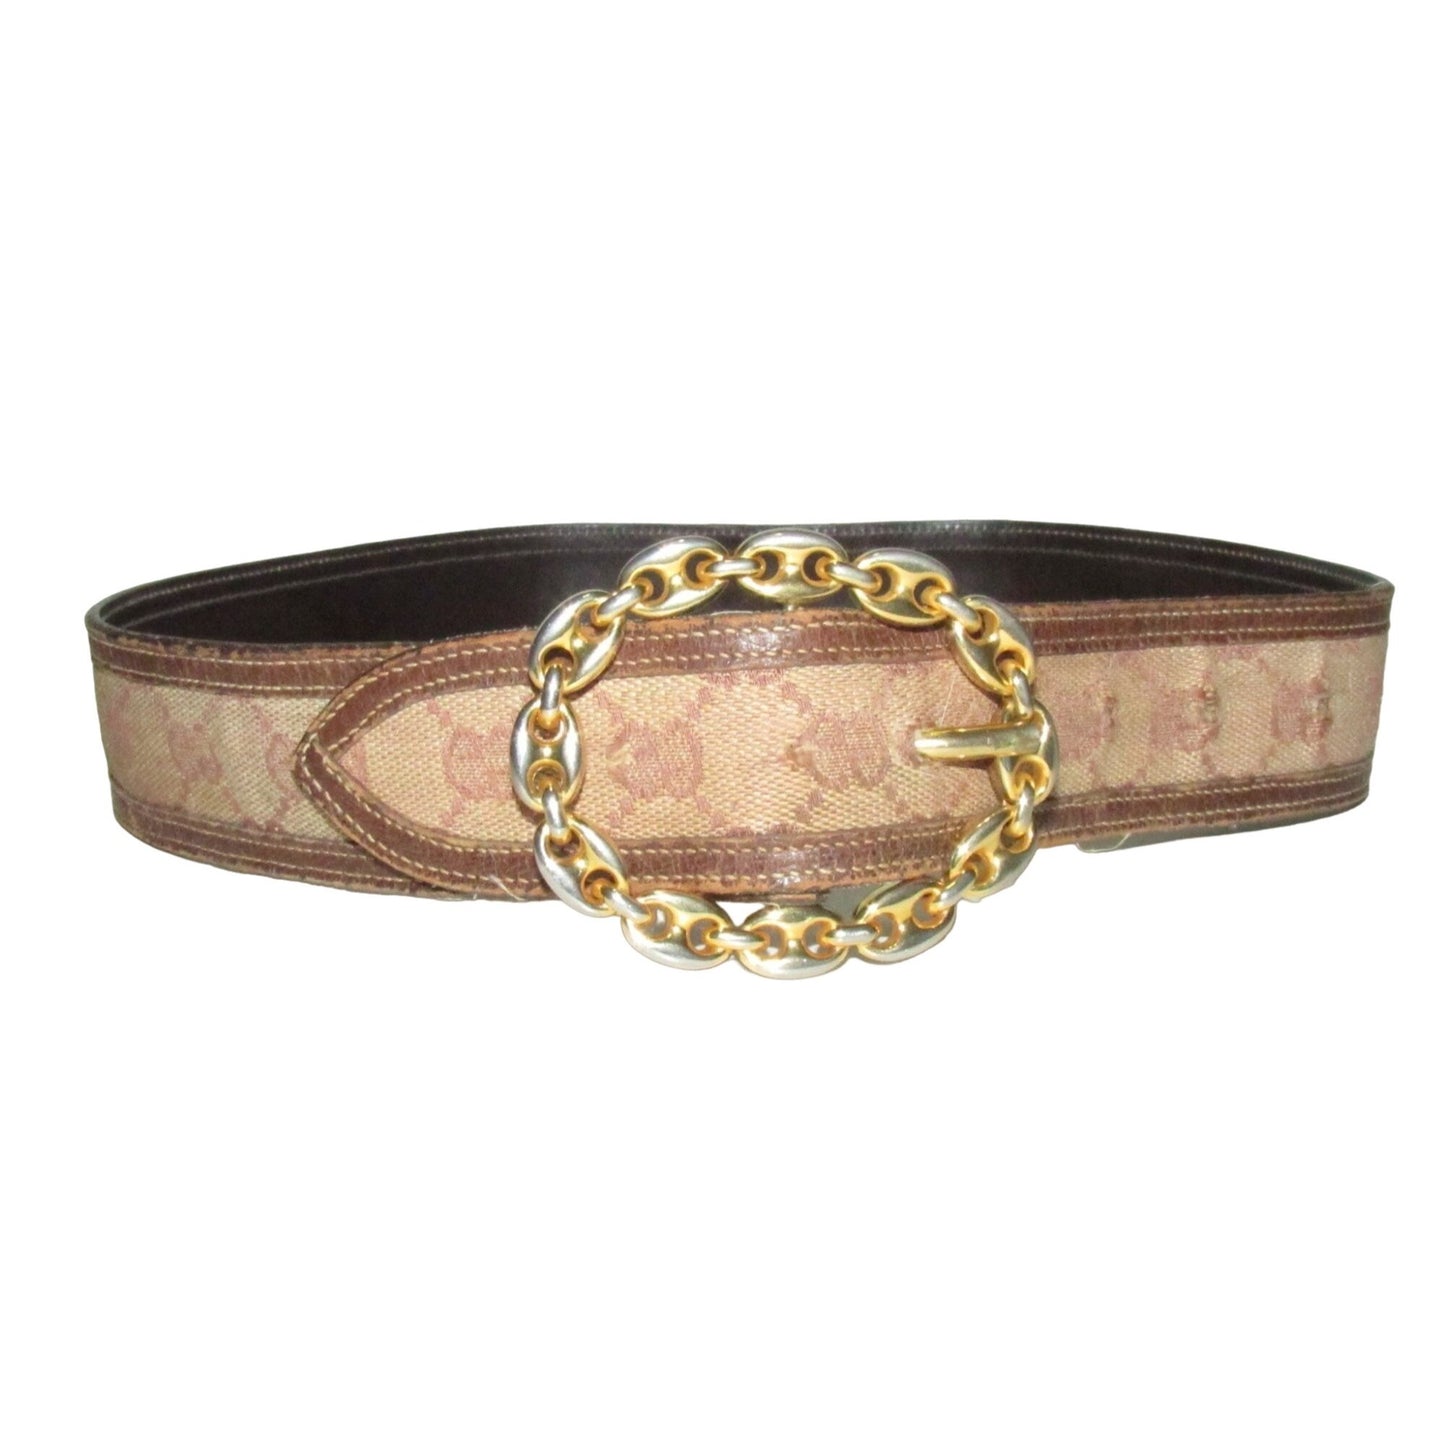 Early brown Guccissima leather belt w a gold Gucci link buckle